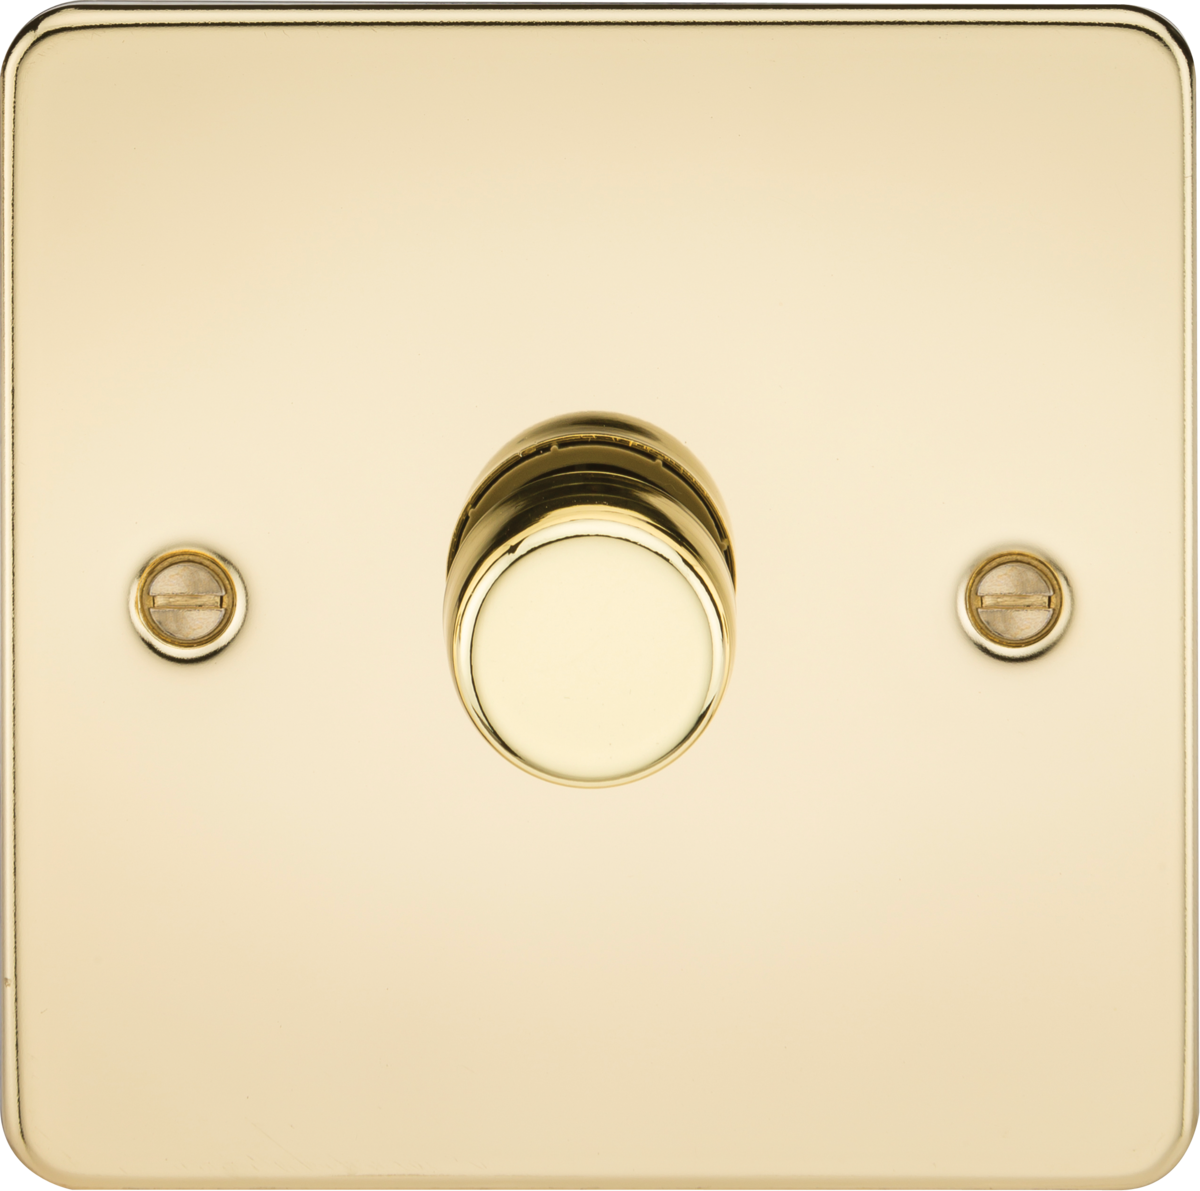 Flat Plate 1G 2 way 10-200W (5-150W LED) trailing edge dimmer - Polished Brass